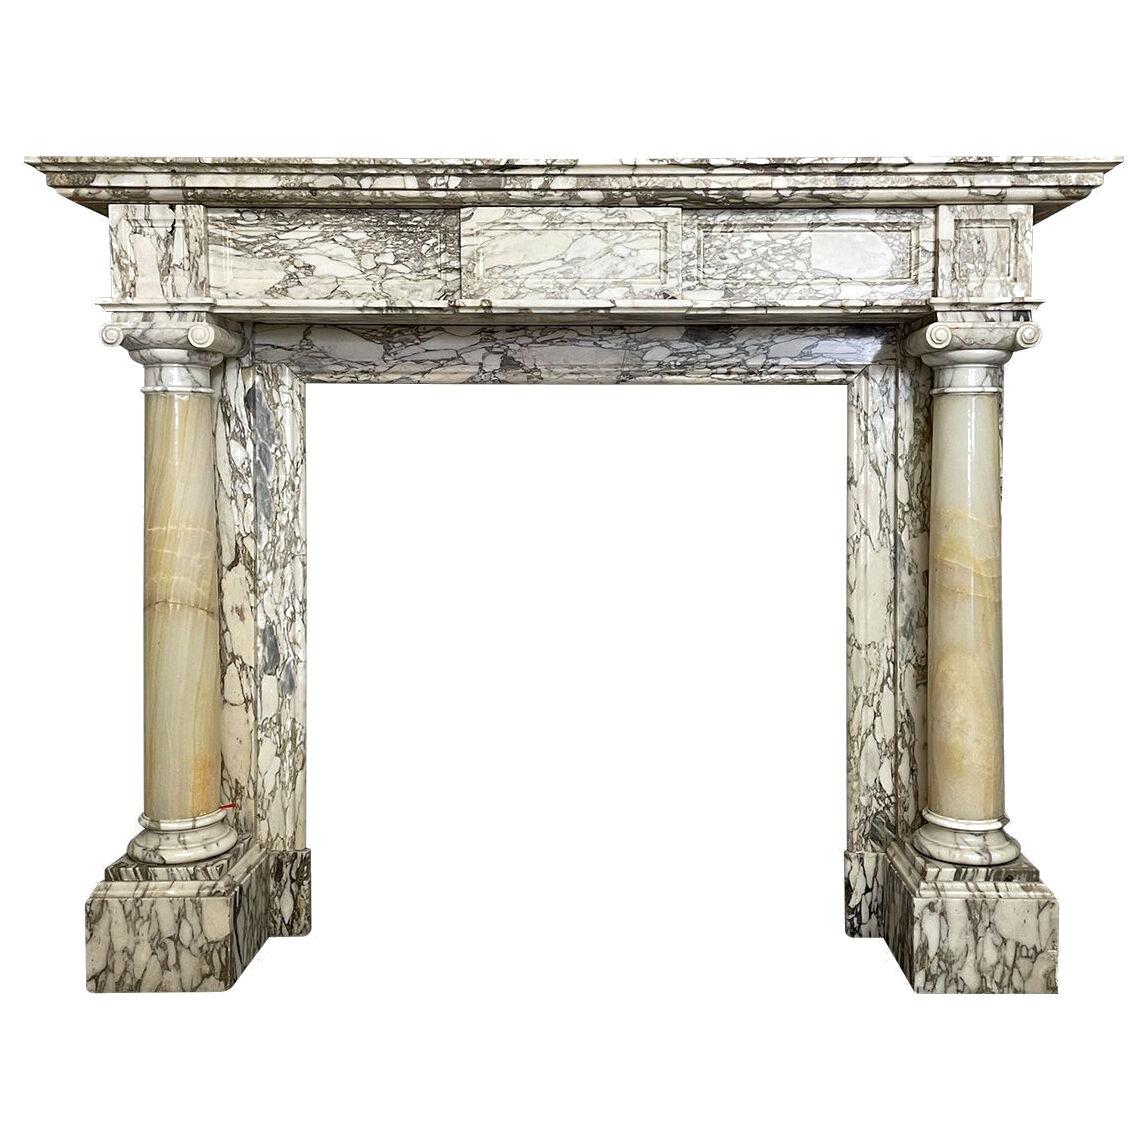 Antique French Columned Fireplace Mantel in Breche Marble